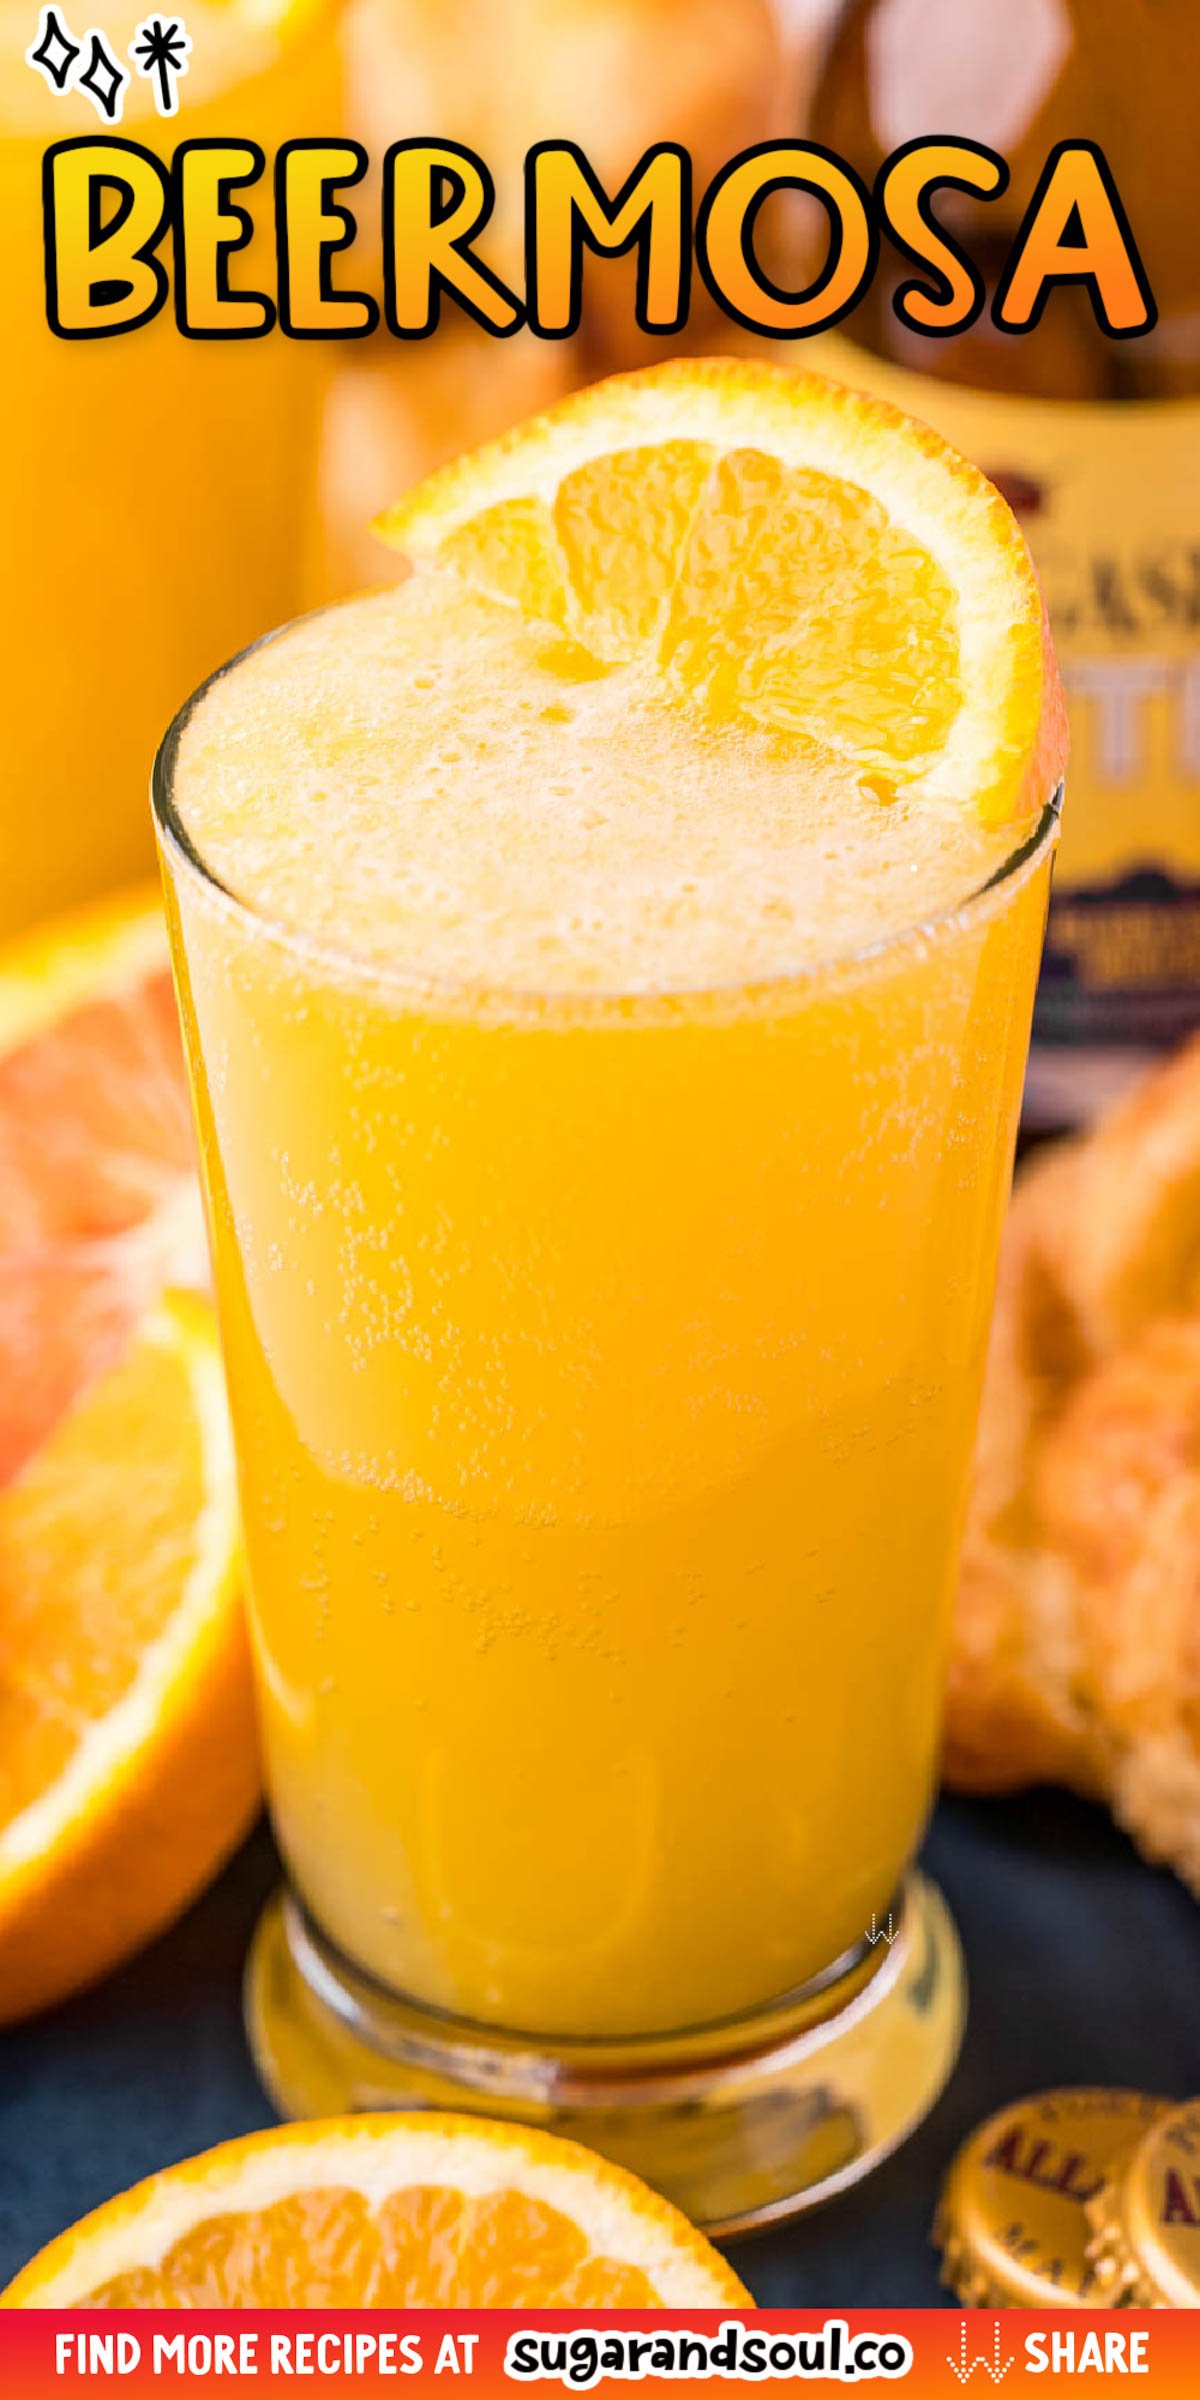 This Beermosa is made using your favorite wheat beer and orange juice to create the perfect drink everyone will love sipping on at brunch! via @sugarandsoulco